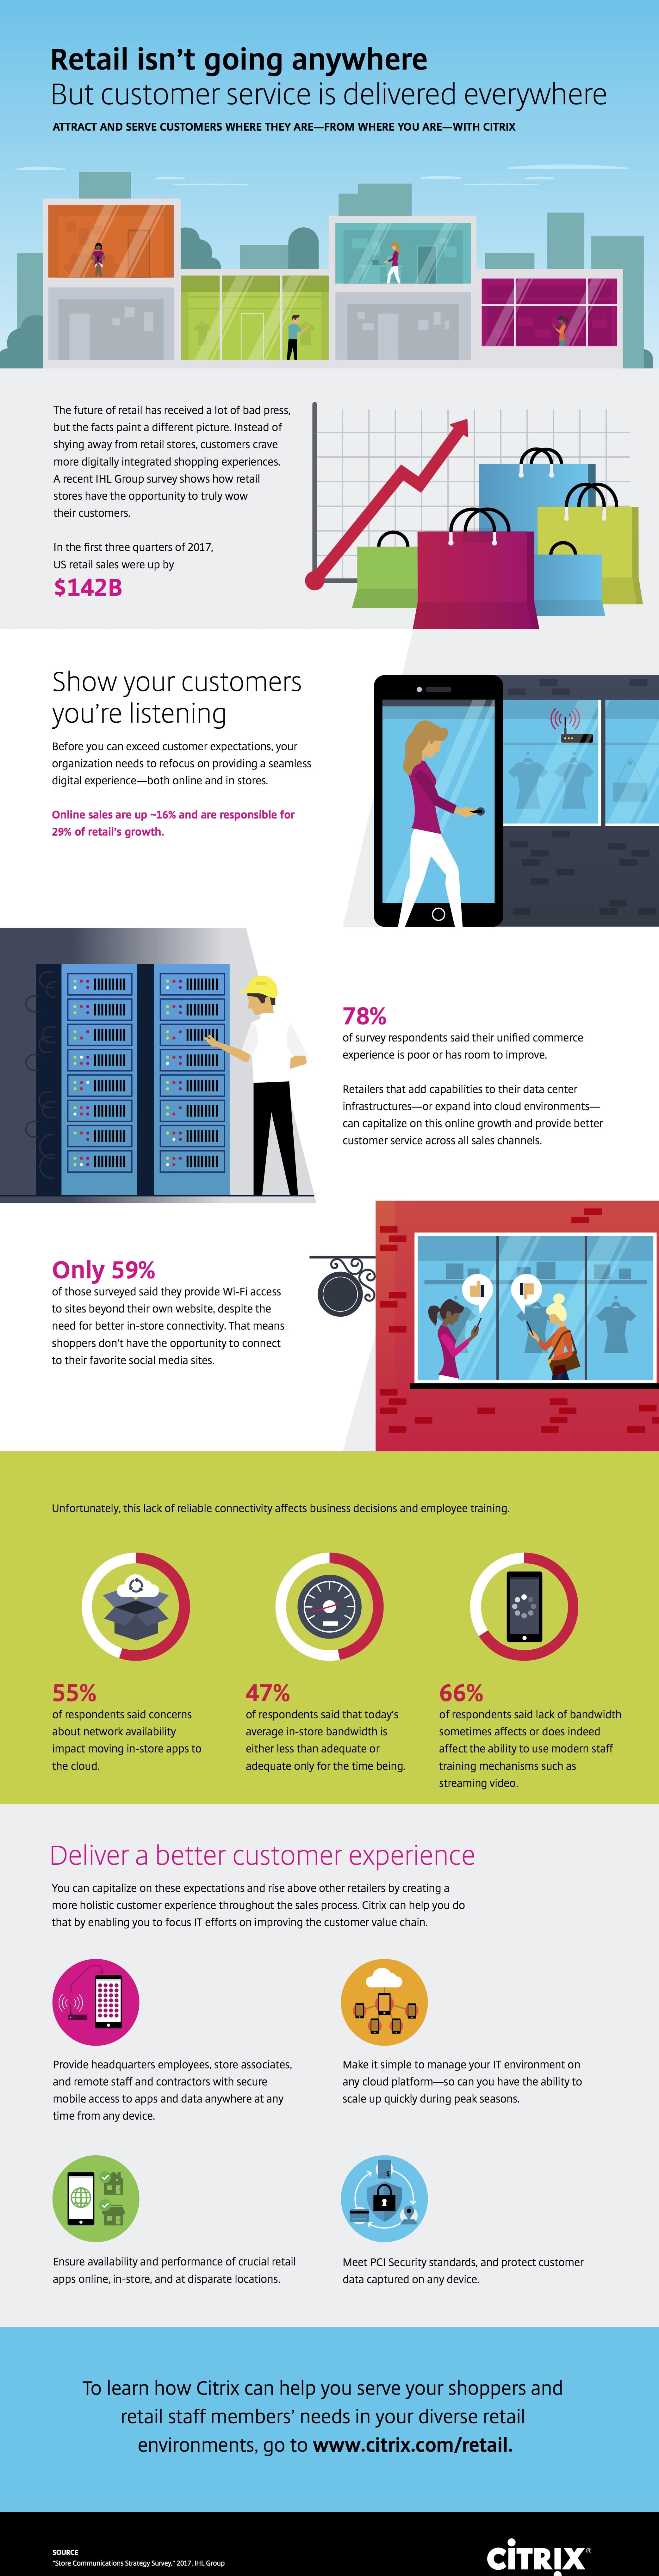 Infographic enahnce in-store customer service in retail with IT